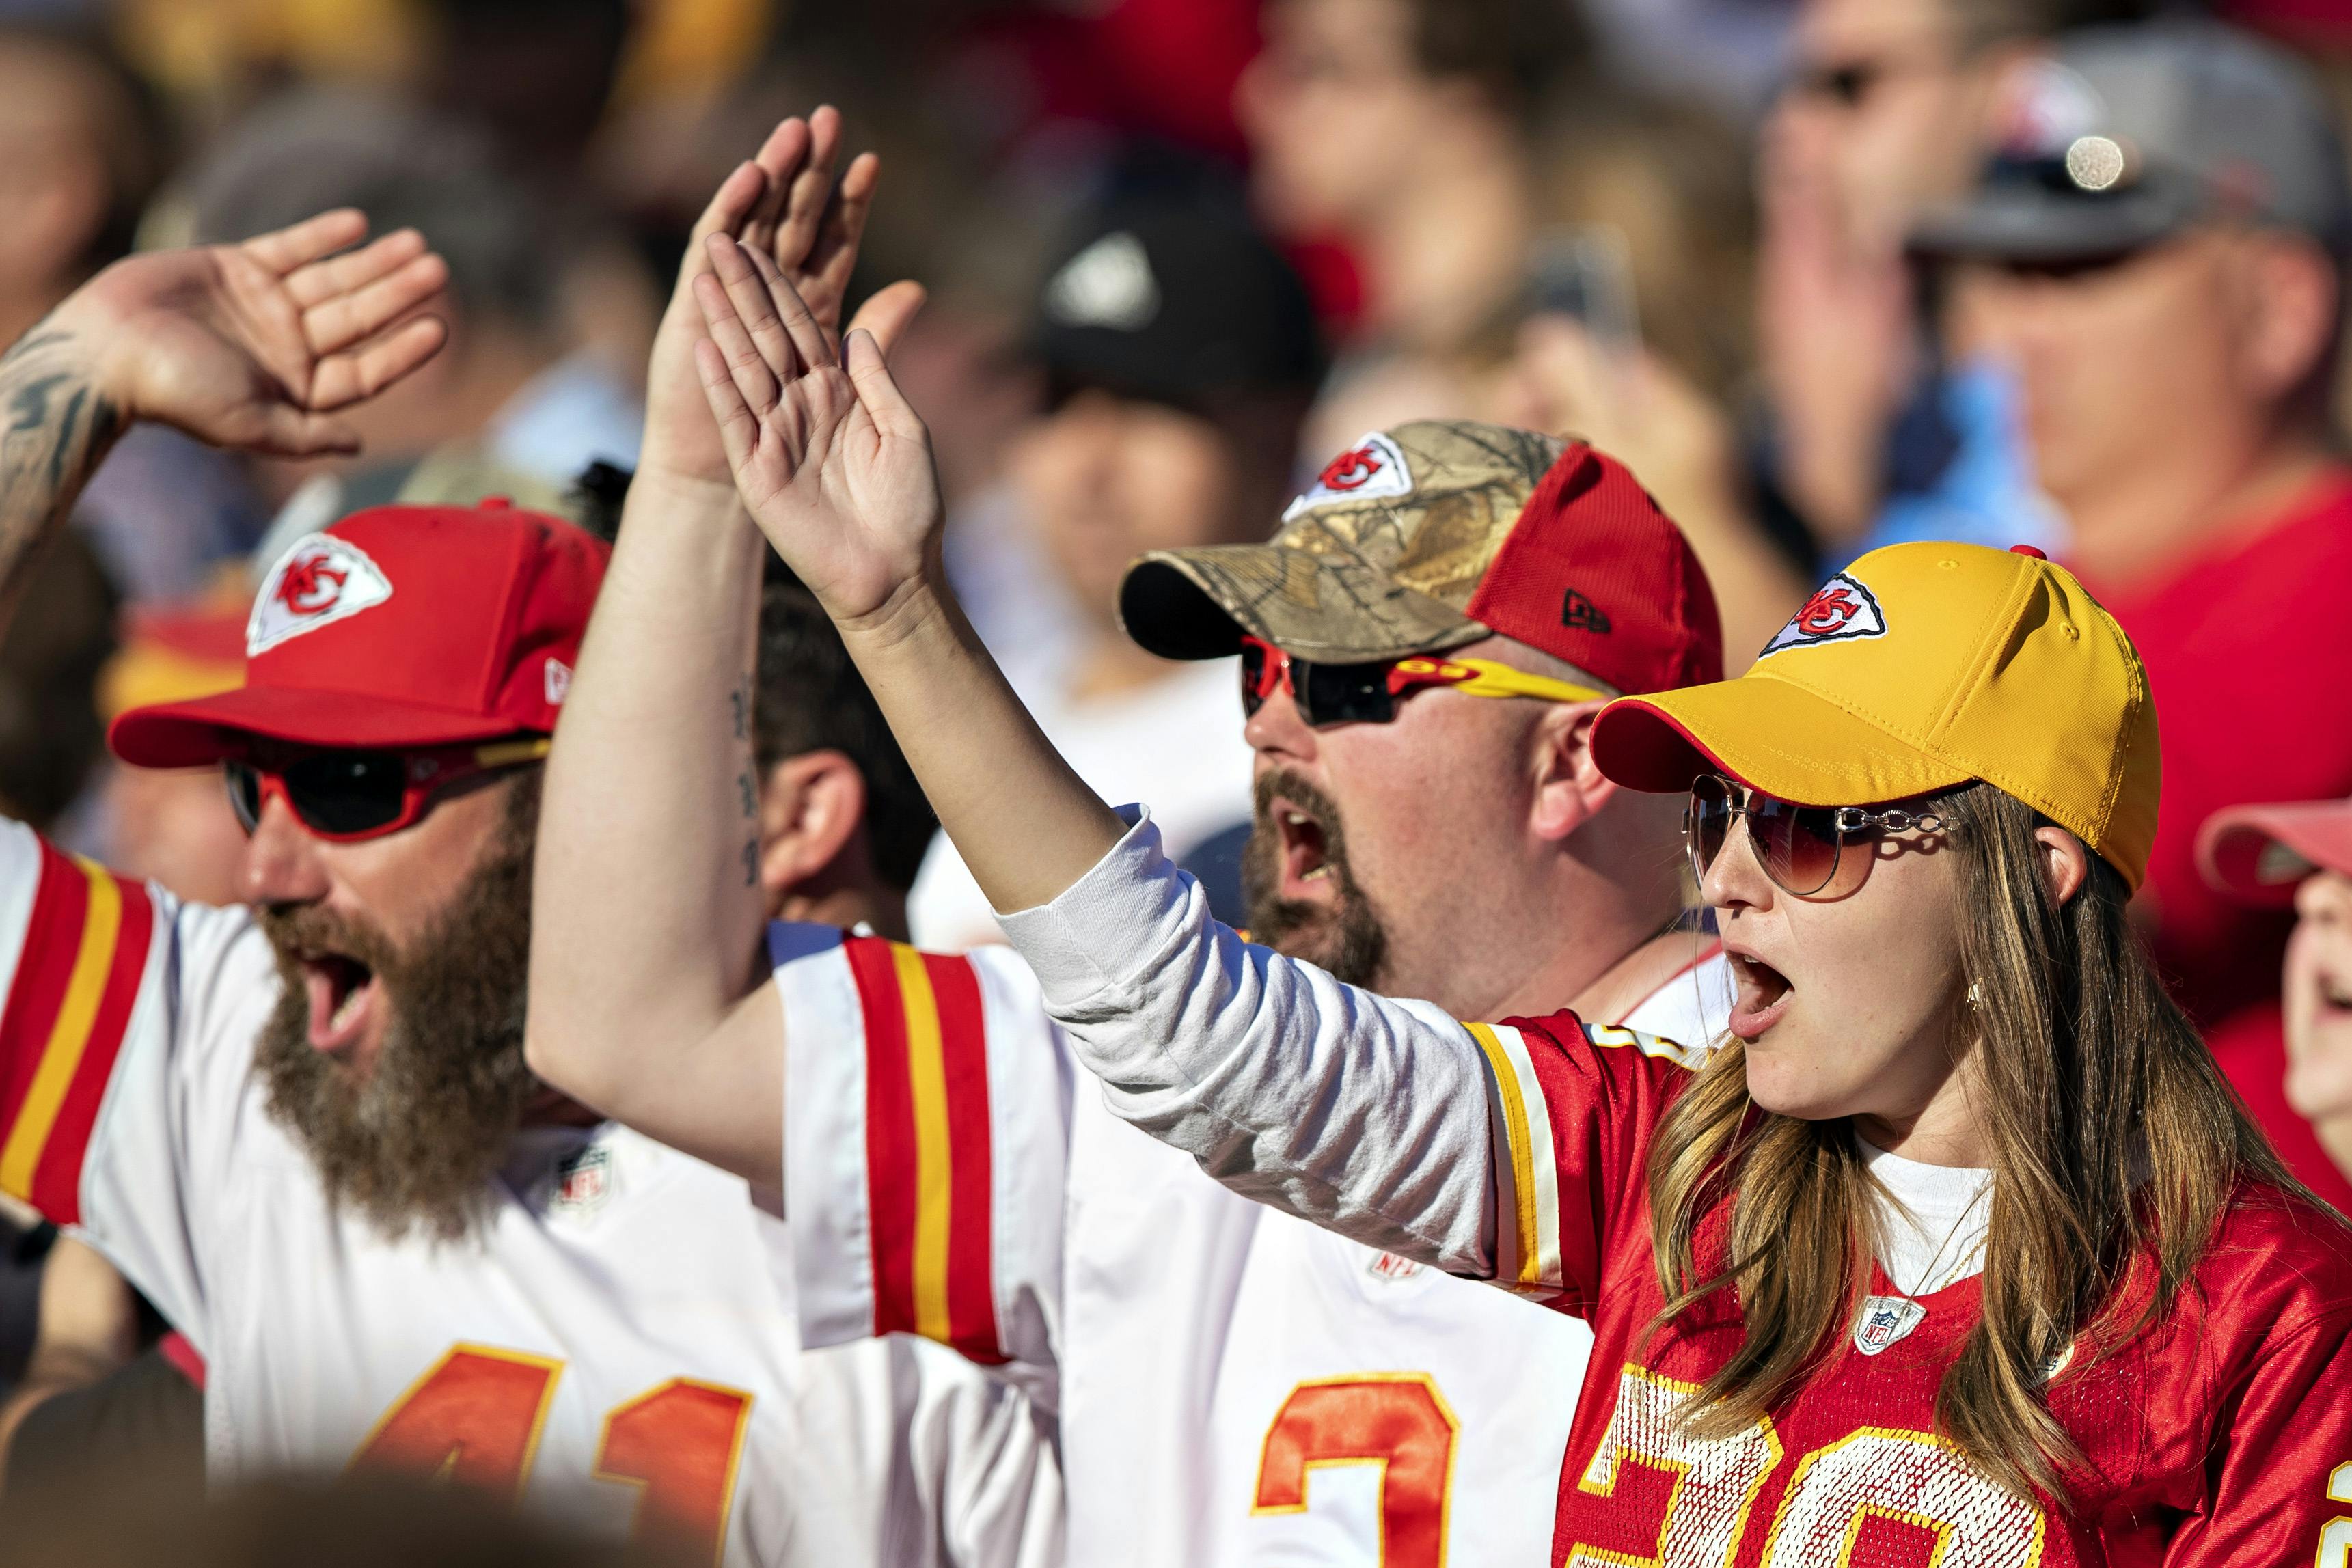 Kansas City Chiefs can expect protests by Native Americans over